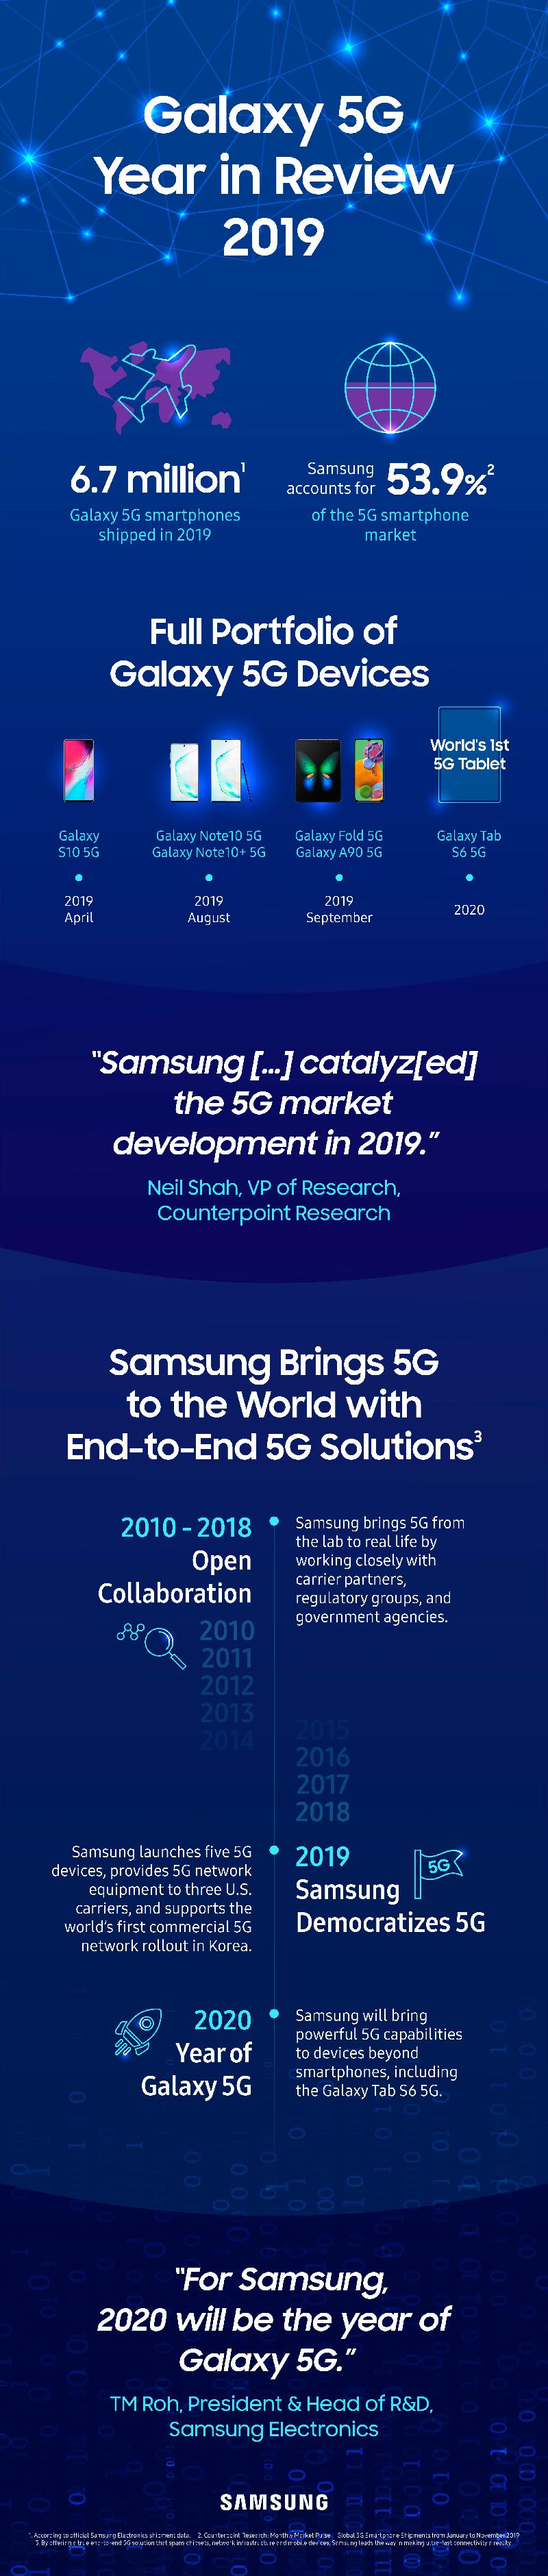 Galaxy-5G-Year-in-Review-2019-3.jpg